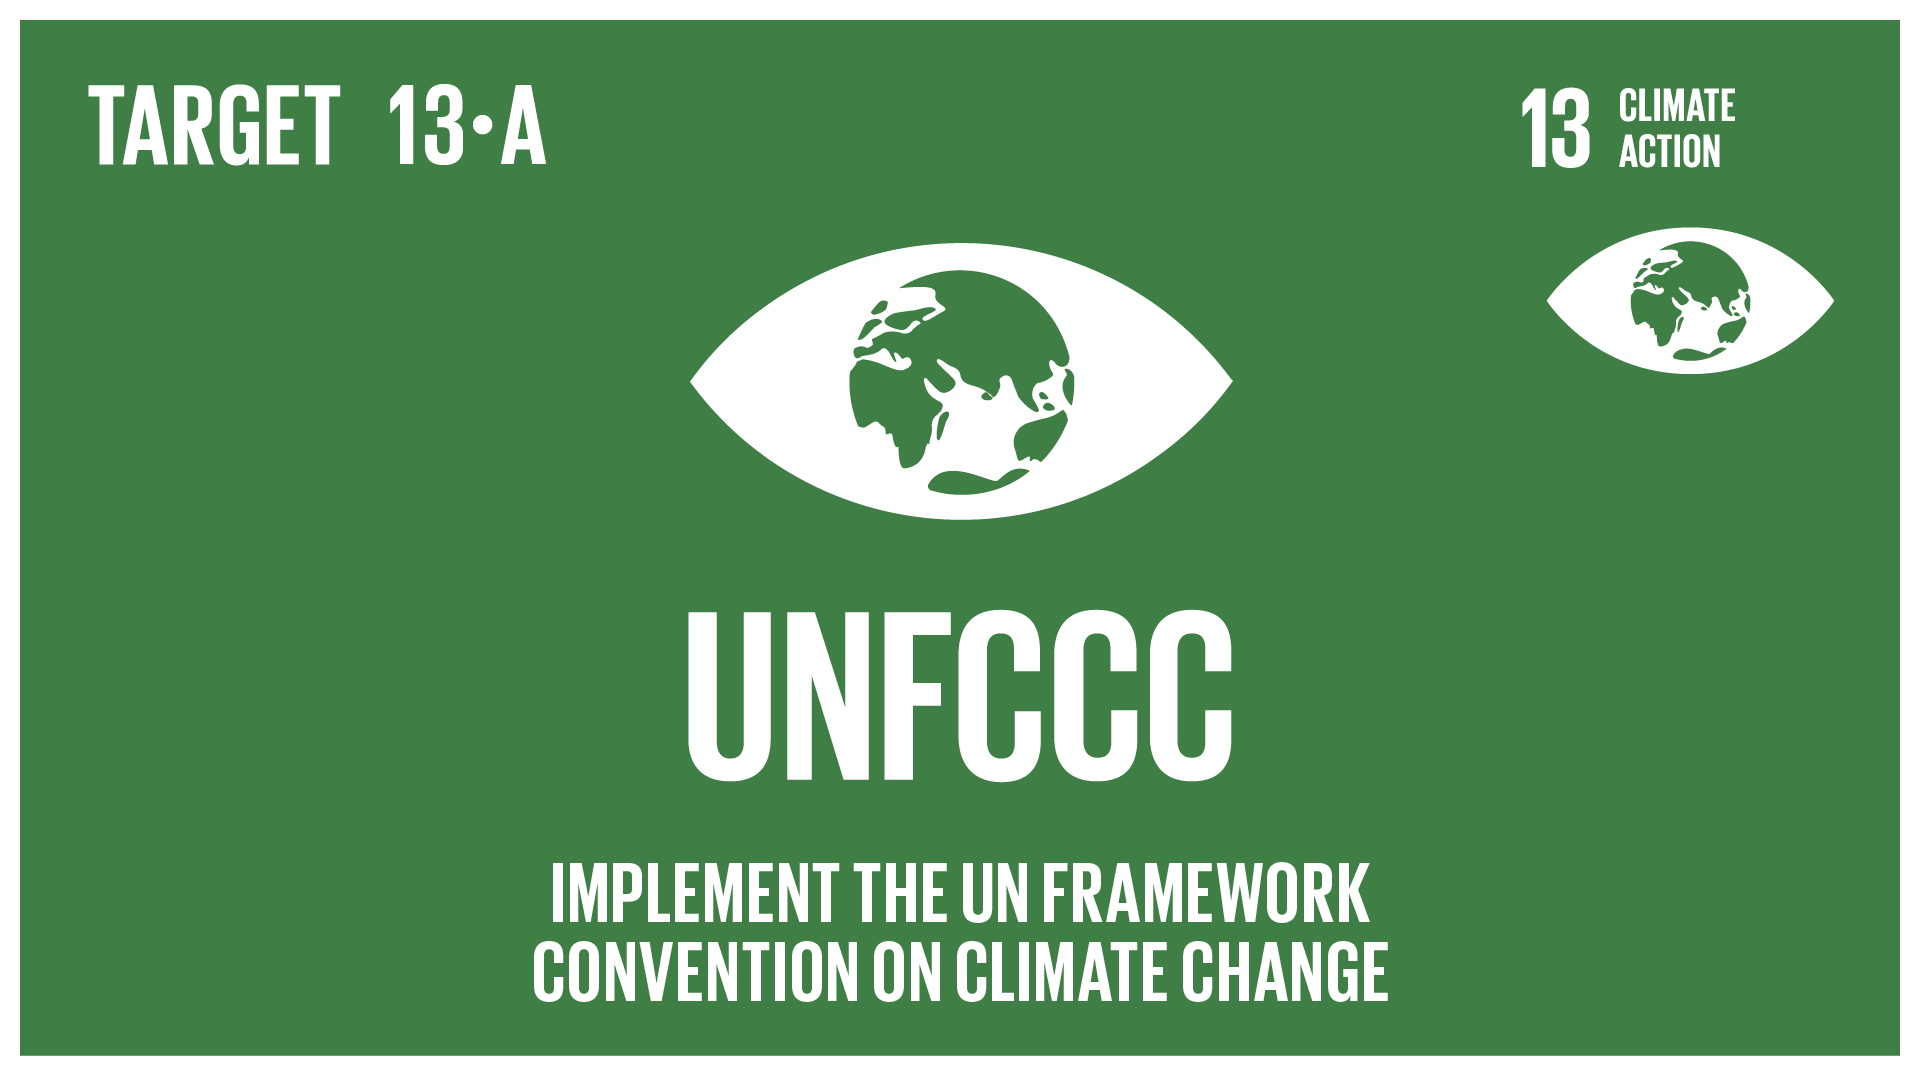 Graphic displaying the implementation of the UN Framework Convention on Climate Change 